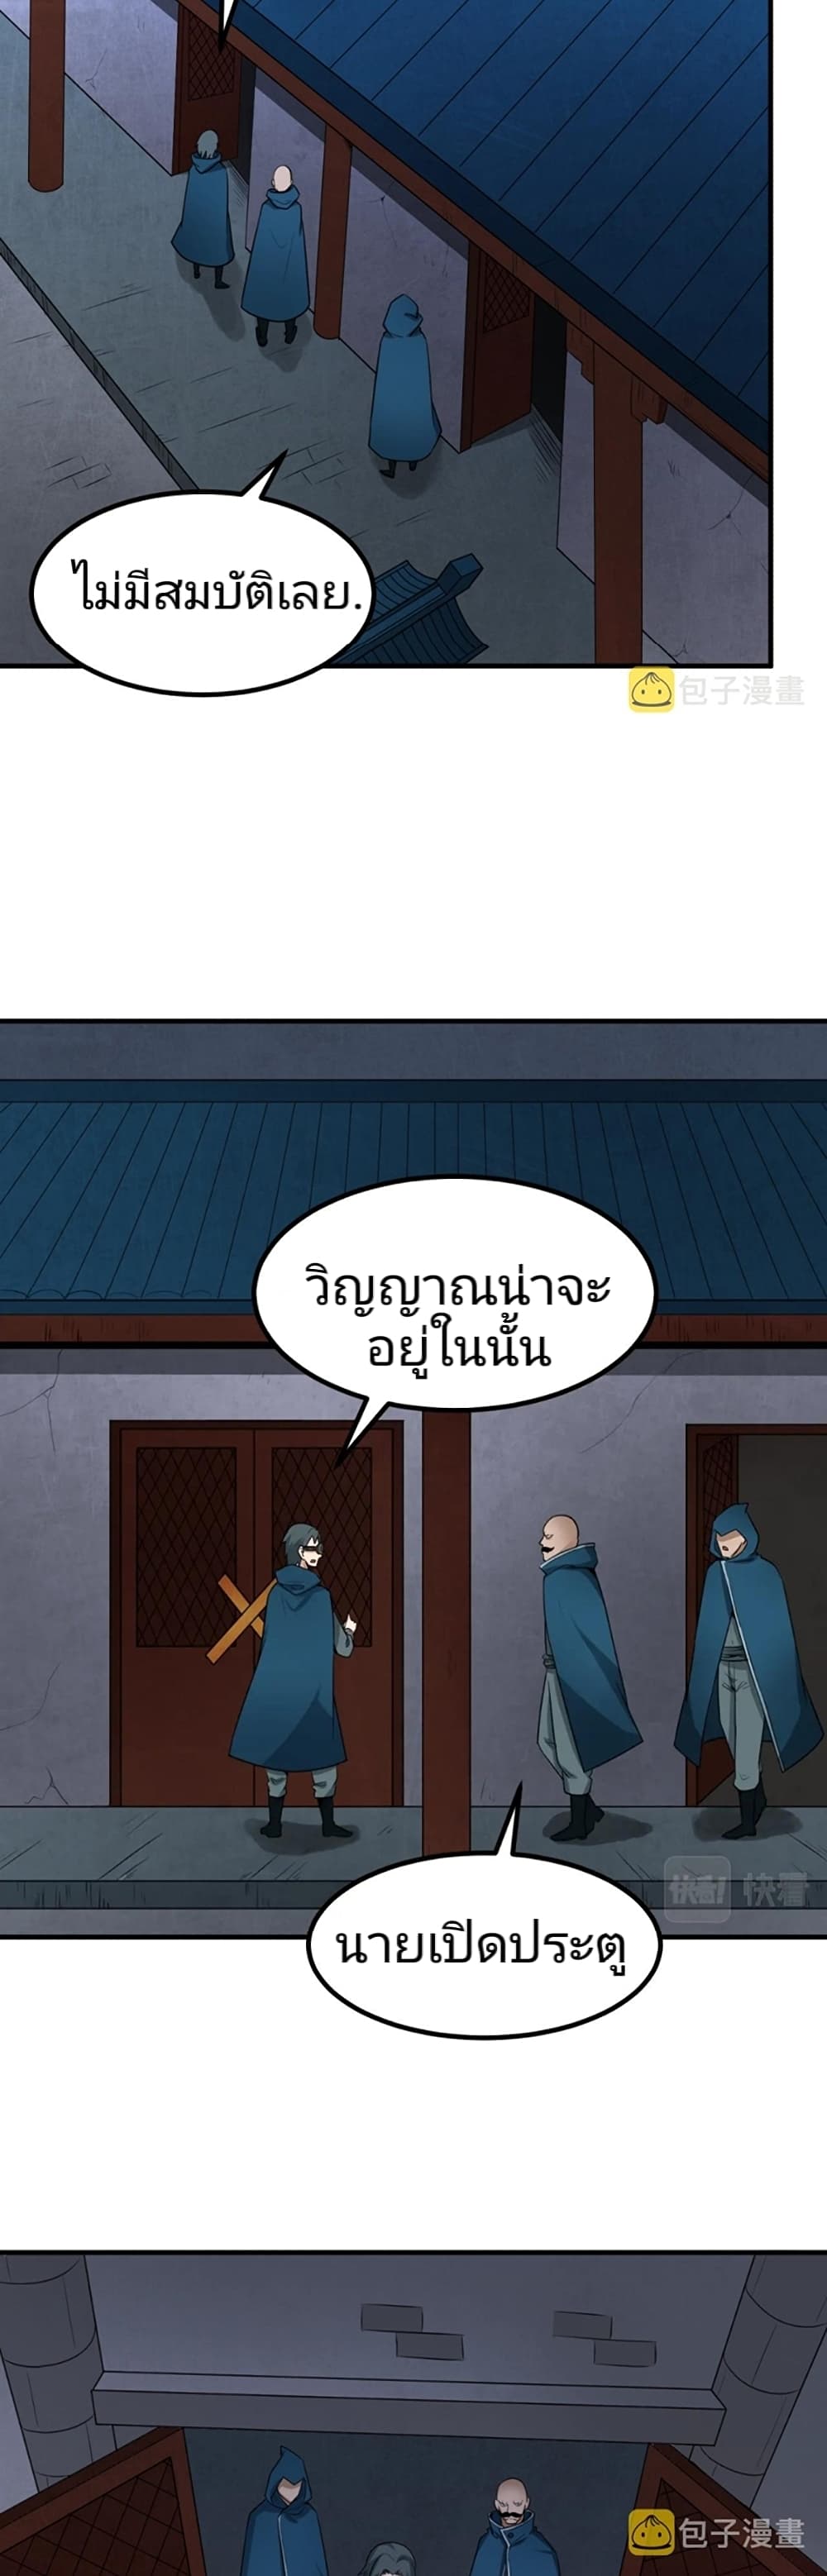 The Age of Ghost Spirits à¸à¸­à¸à¸à¸µà¹ 8 (7)